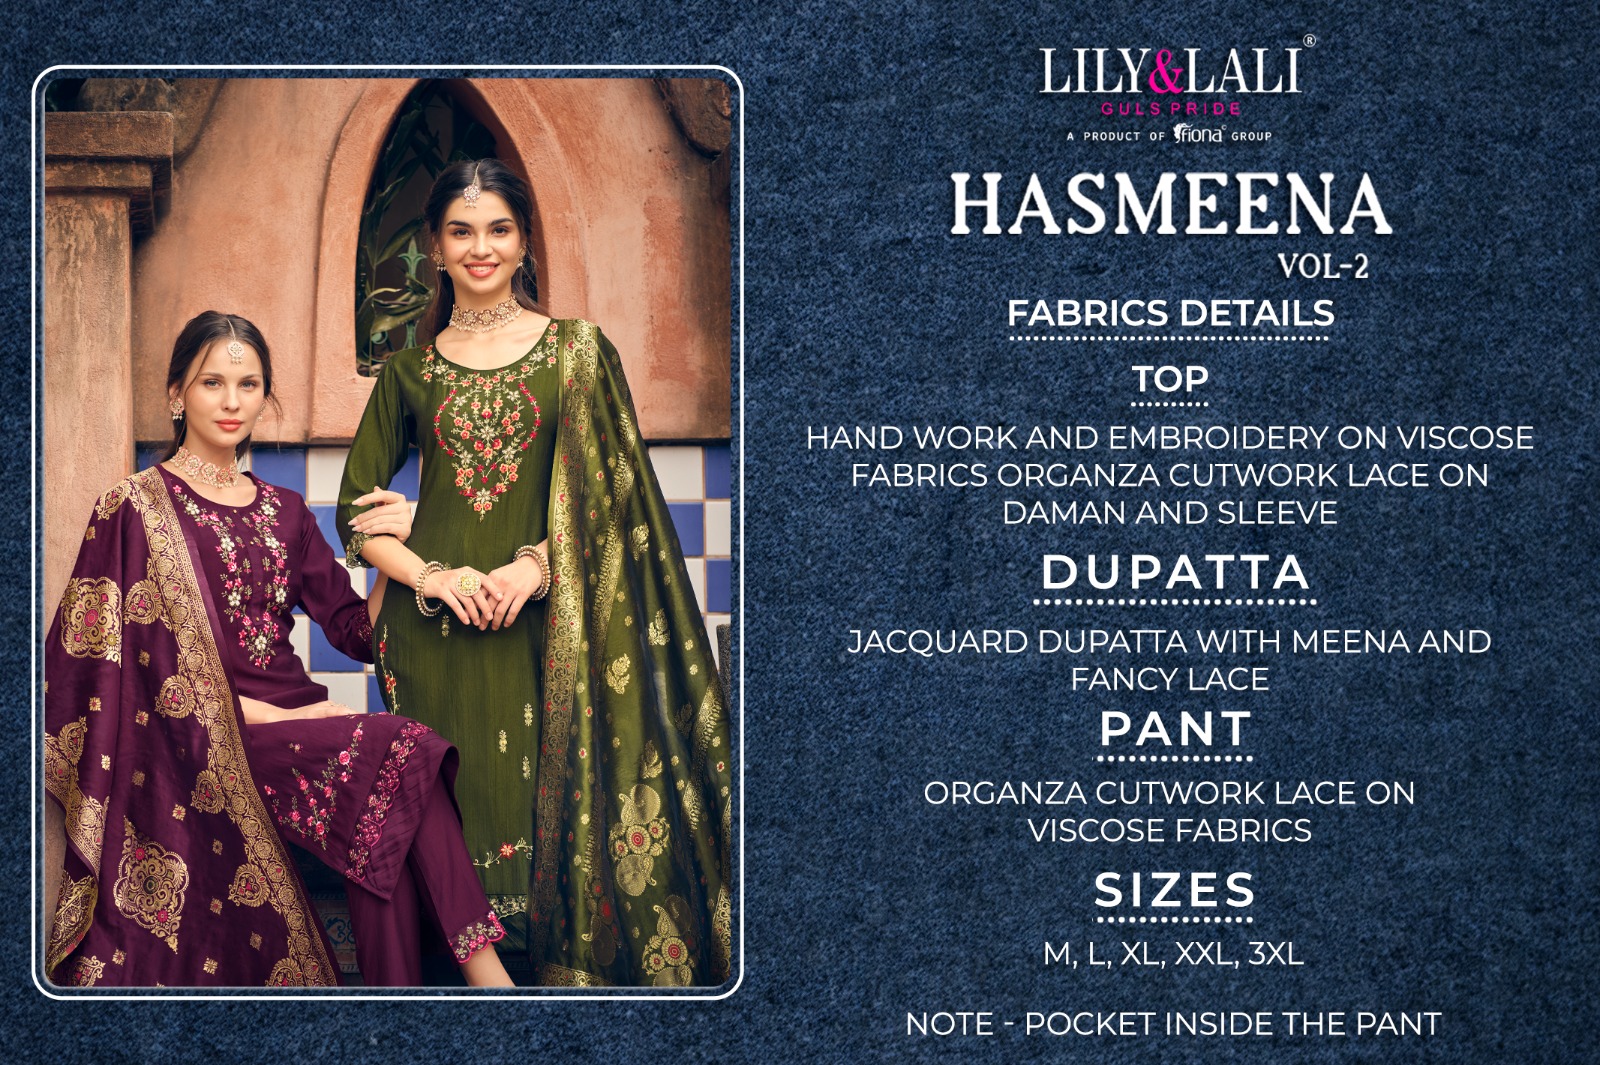 Lily And Lali Hasmeena Vol 2 collection 1